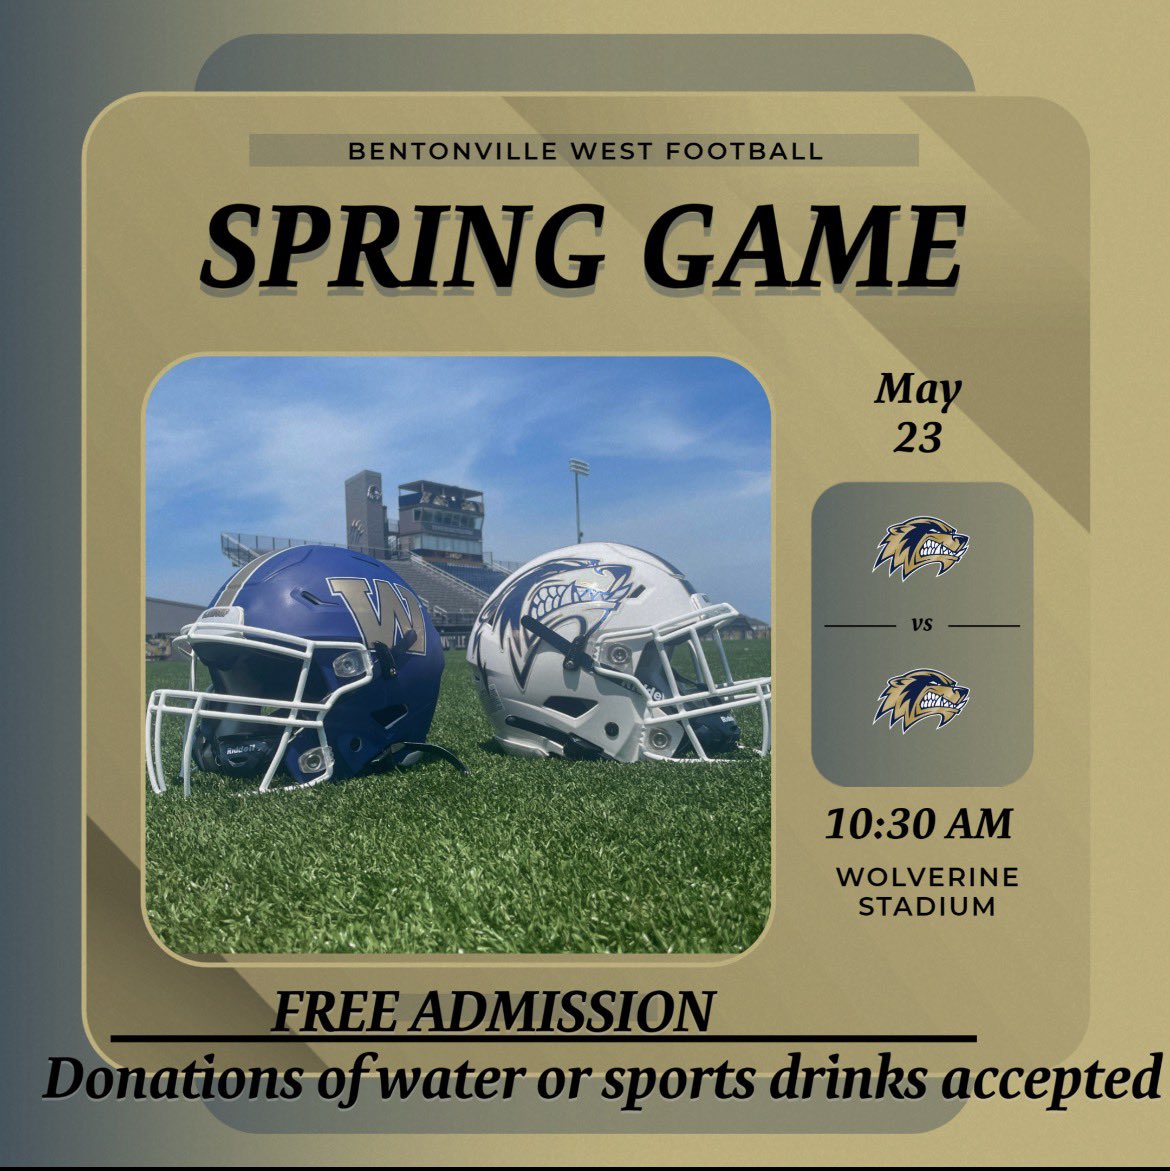 Spring game info. Please bring water or sports drink!